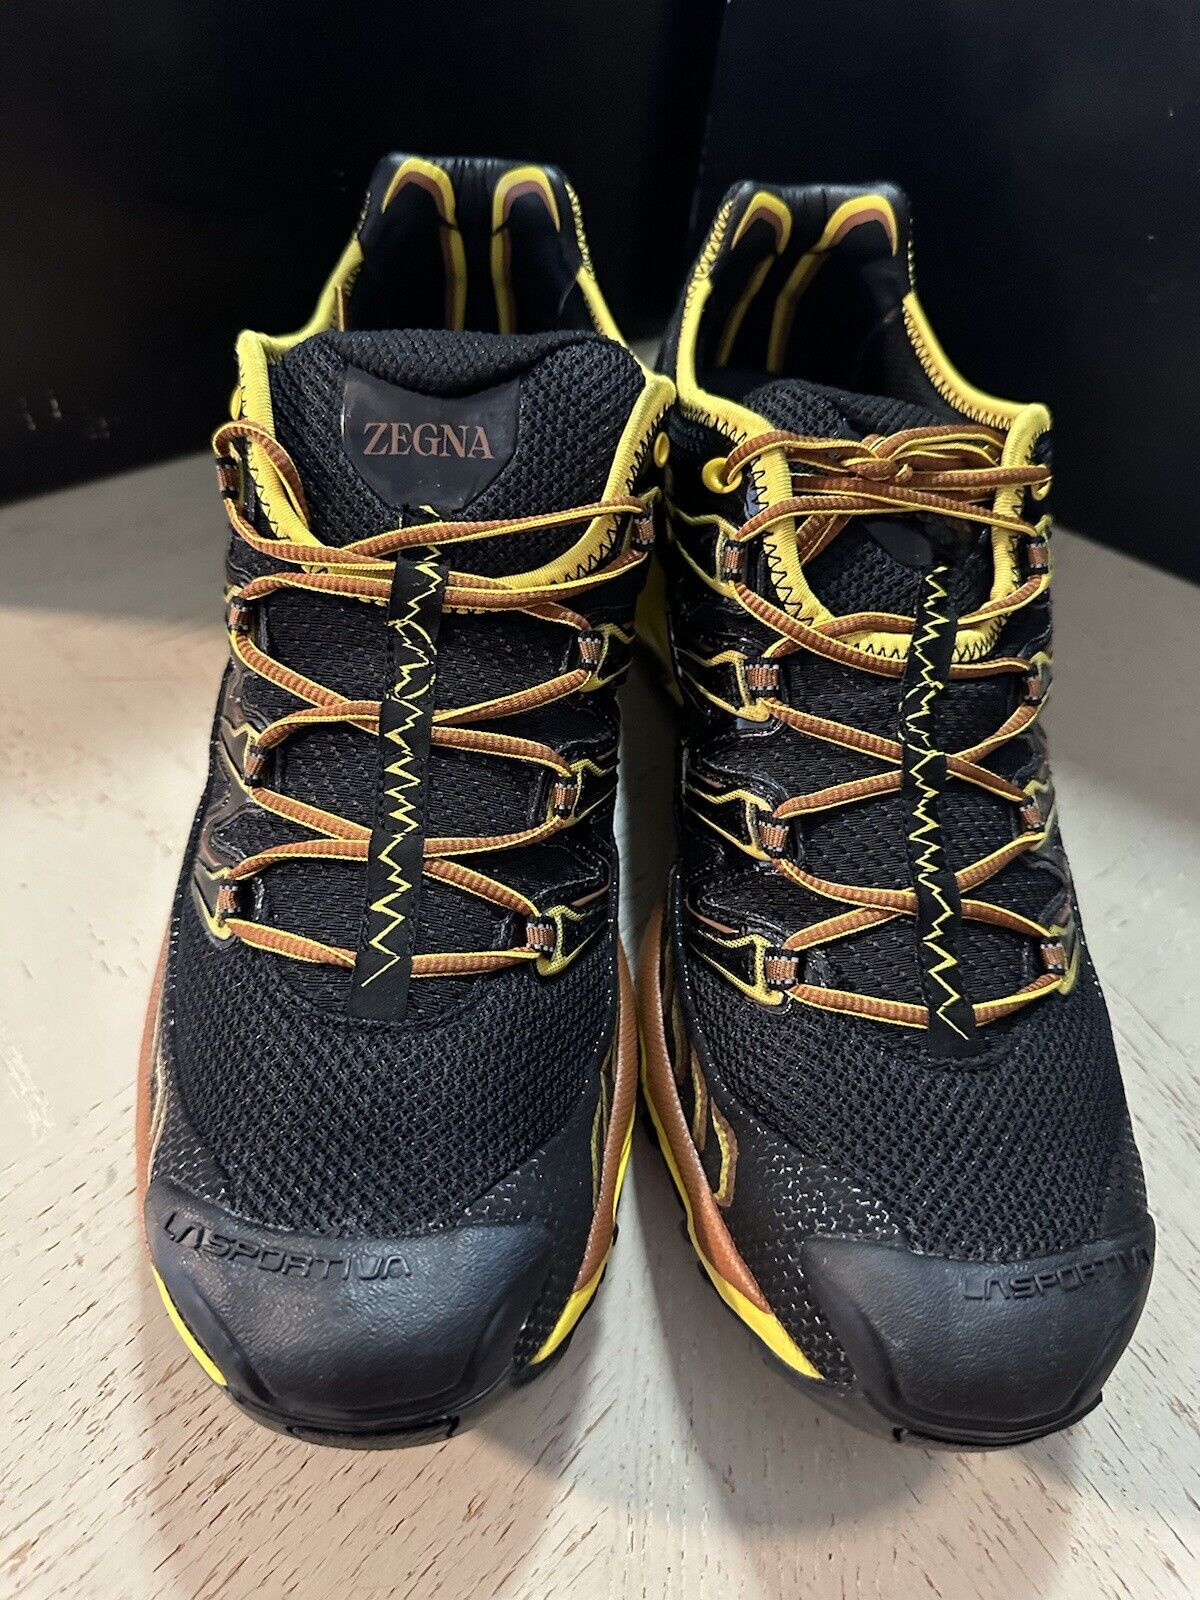 New Zegna Men Sneakers Shoes Black/Yellow/Brown 13 US